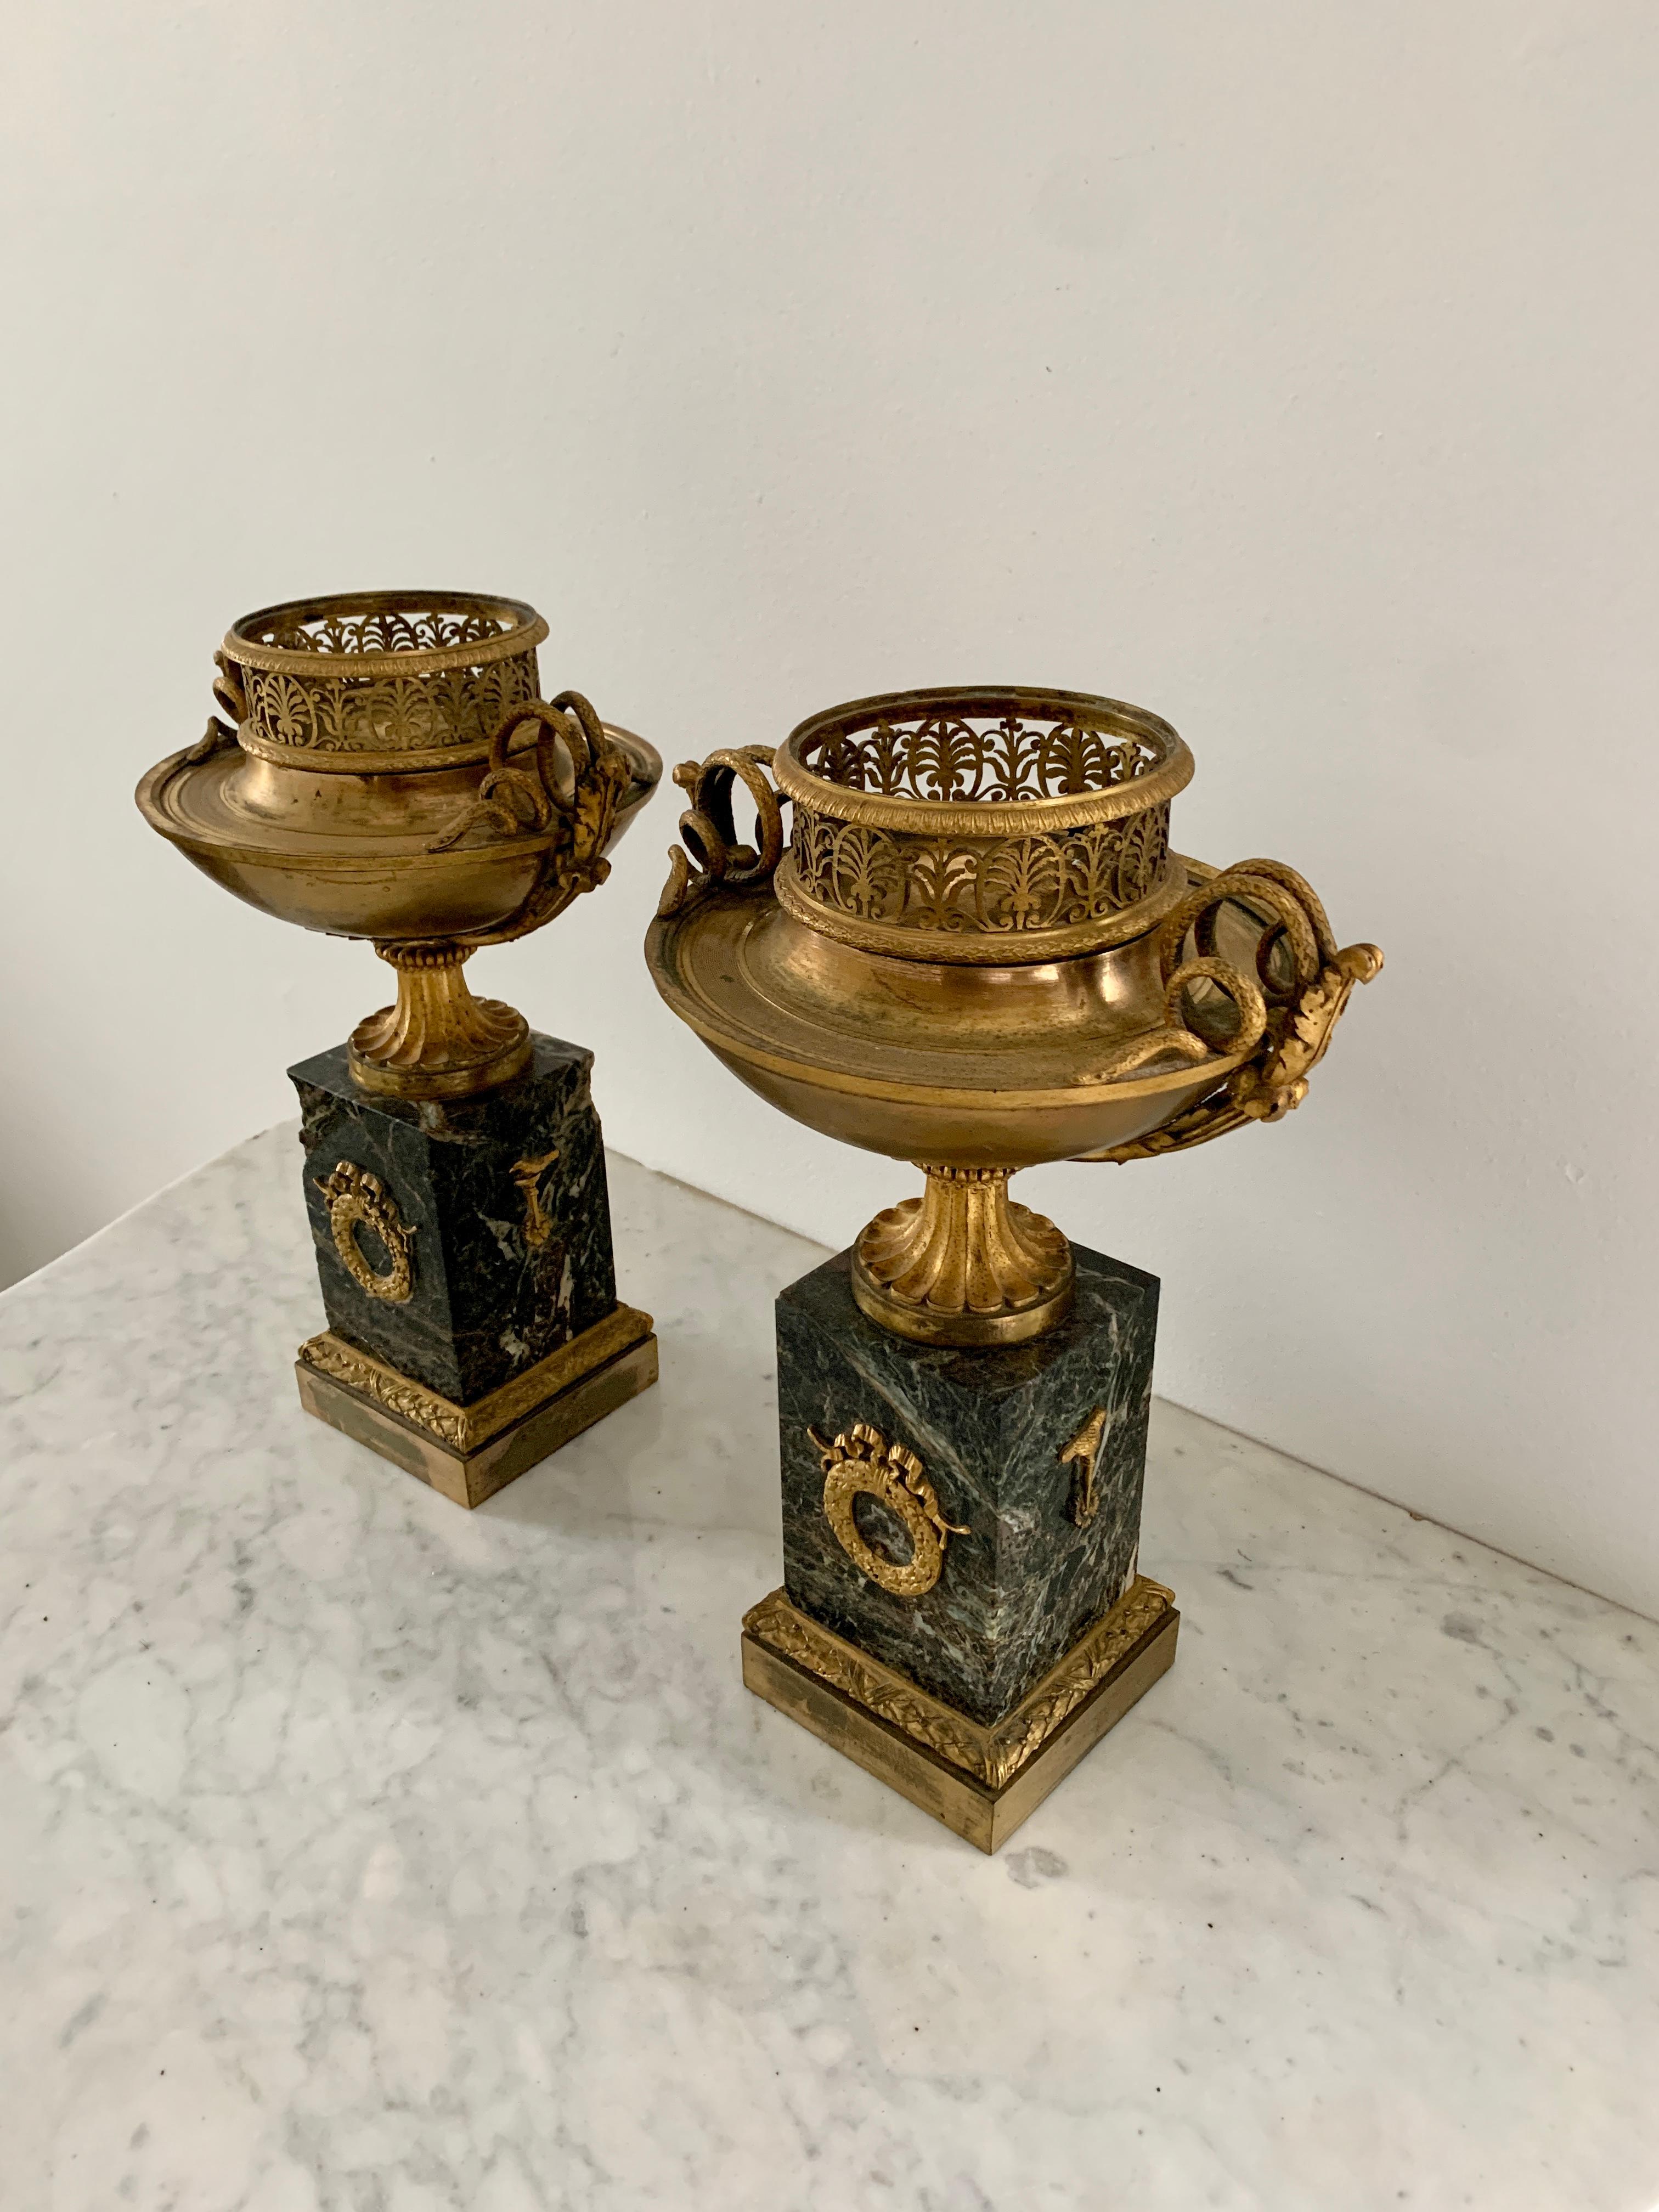 A stunning pair of antique solid brass and marble Grand Tour tazze with ormolu twin snake or serpent handles and laurel wreaths & bird medallions.

Italy, Mid-19th Century

Dimensions: 8